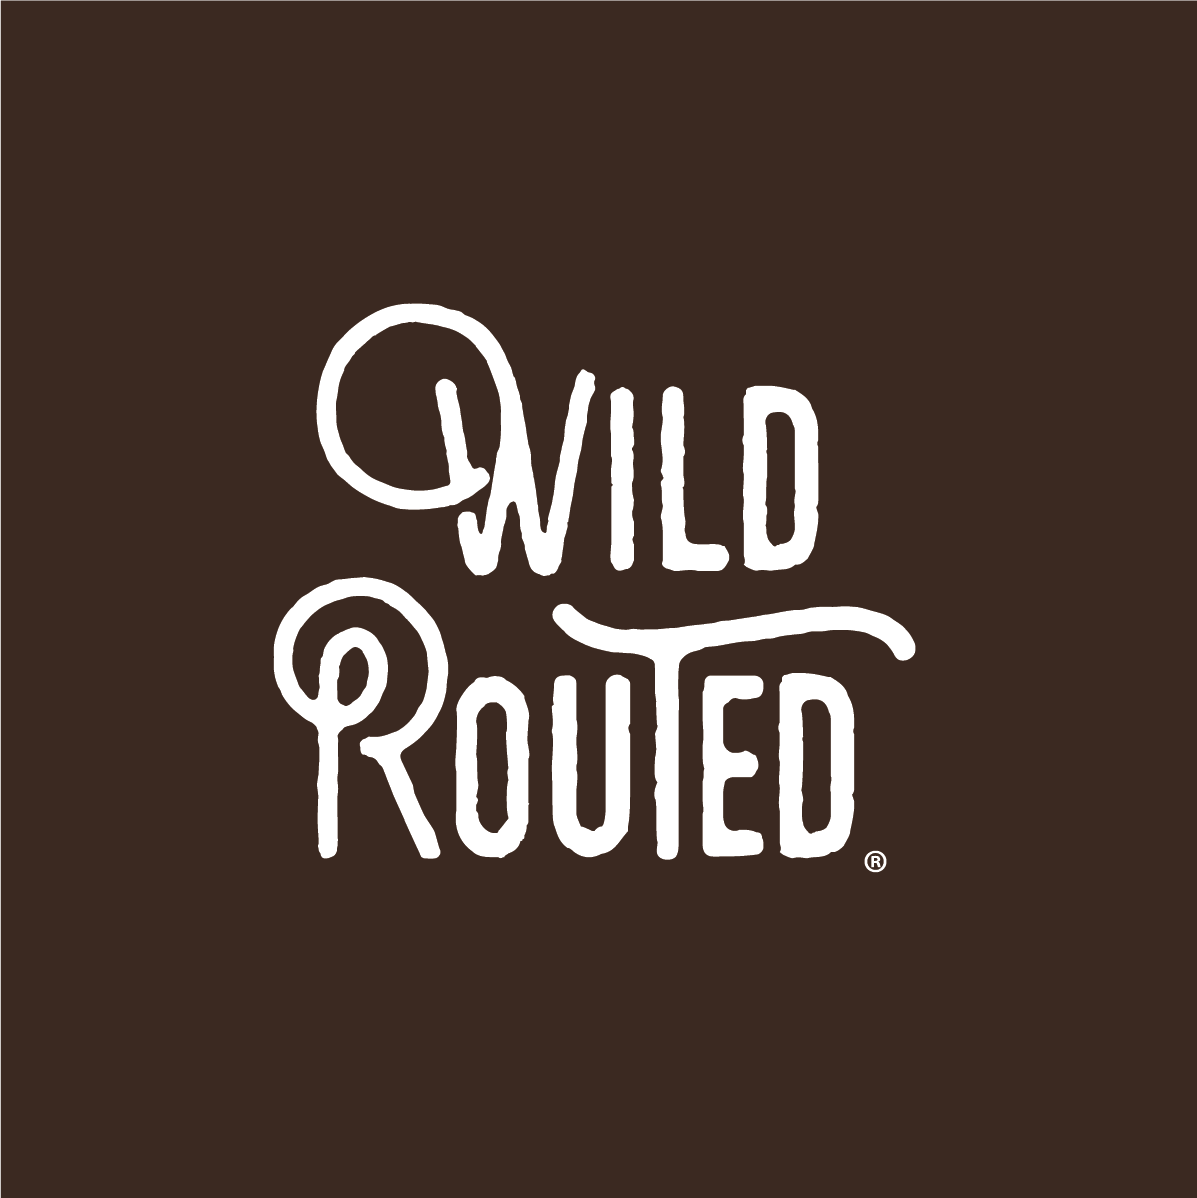 Wild Routed